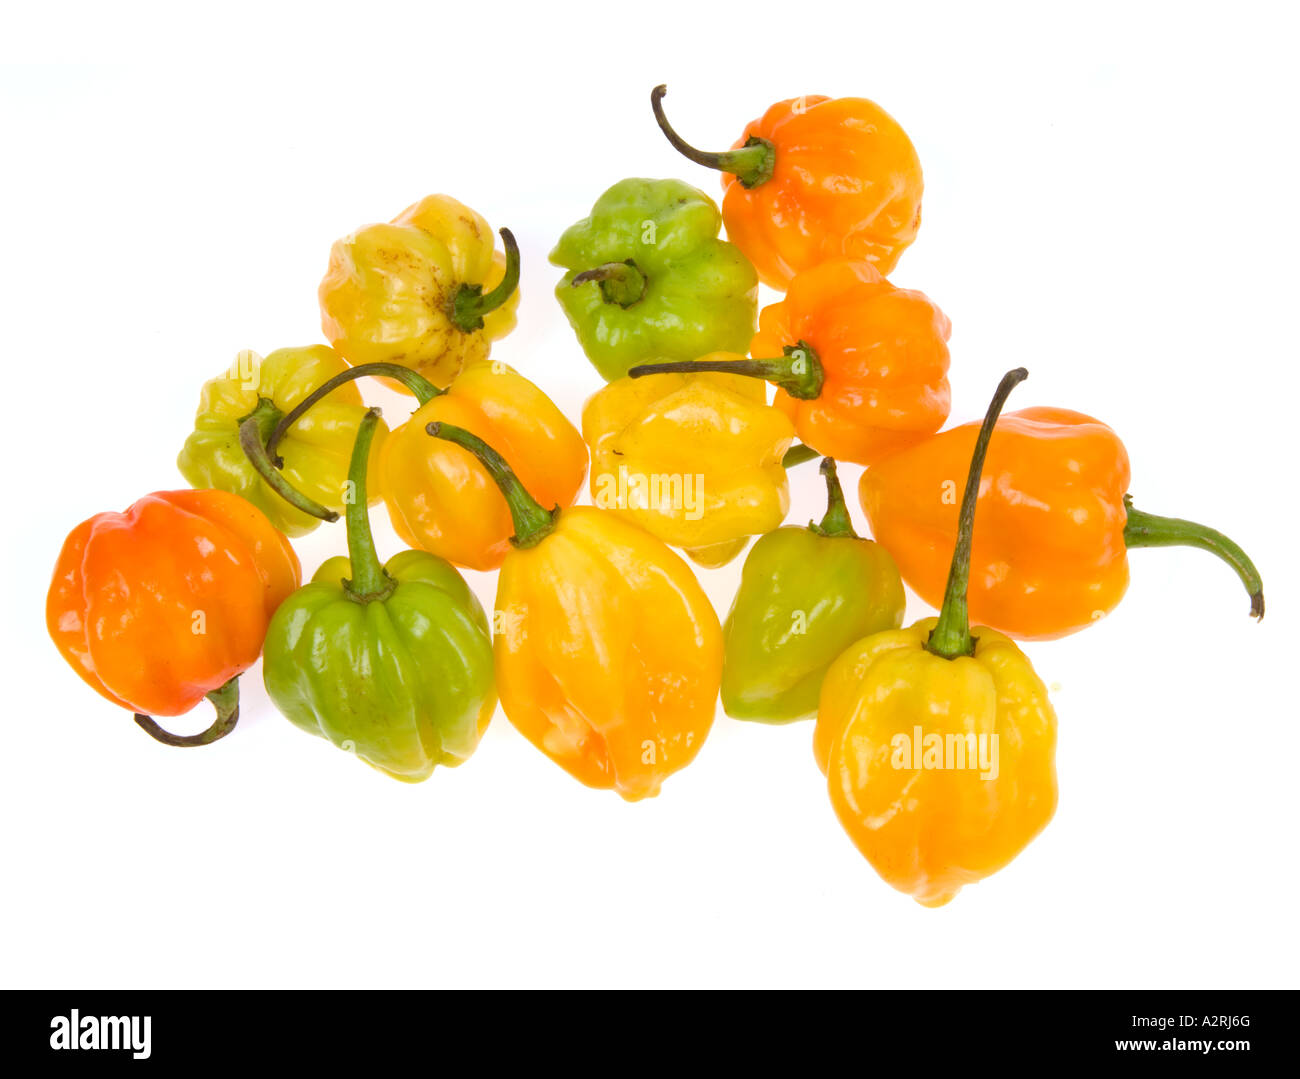 HABANEROS  chilli very Hot spicy chilli peppers yellow green orange red Stock Photo